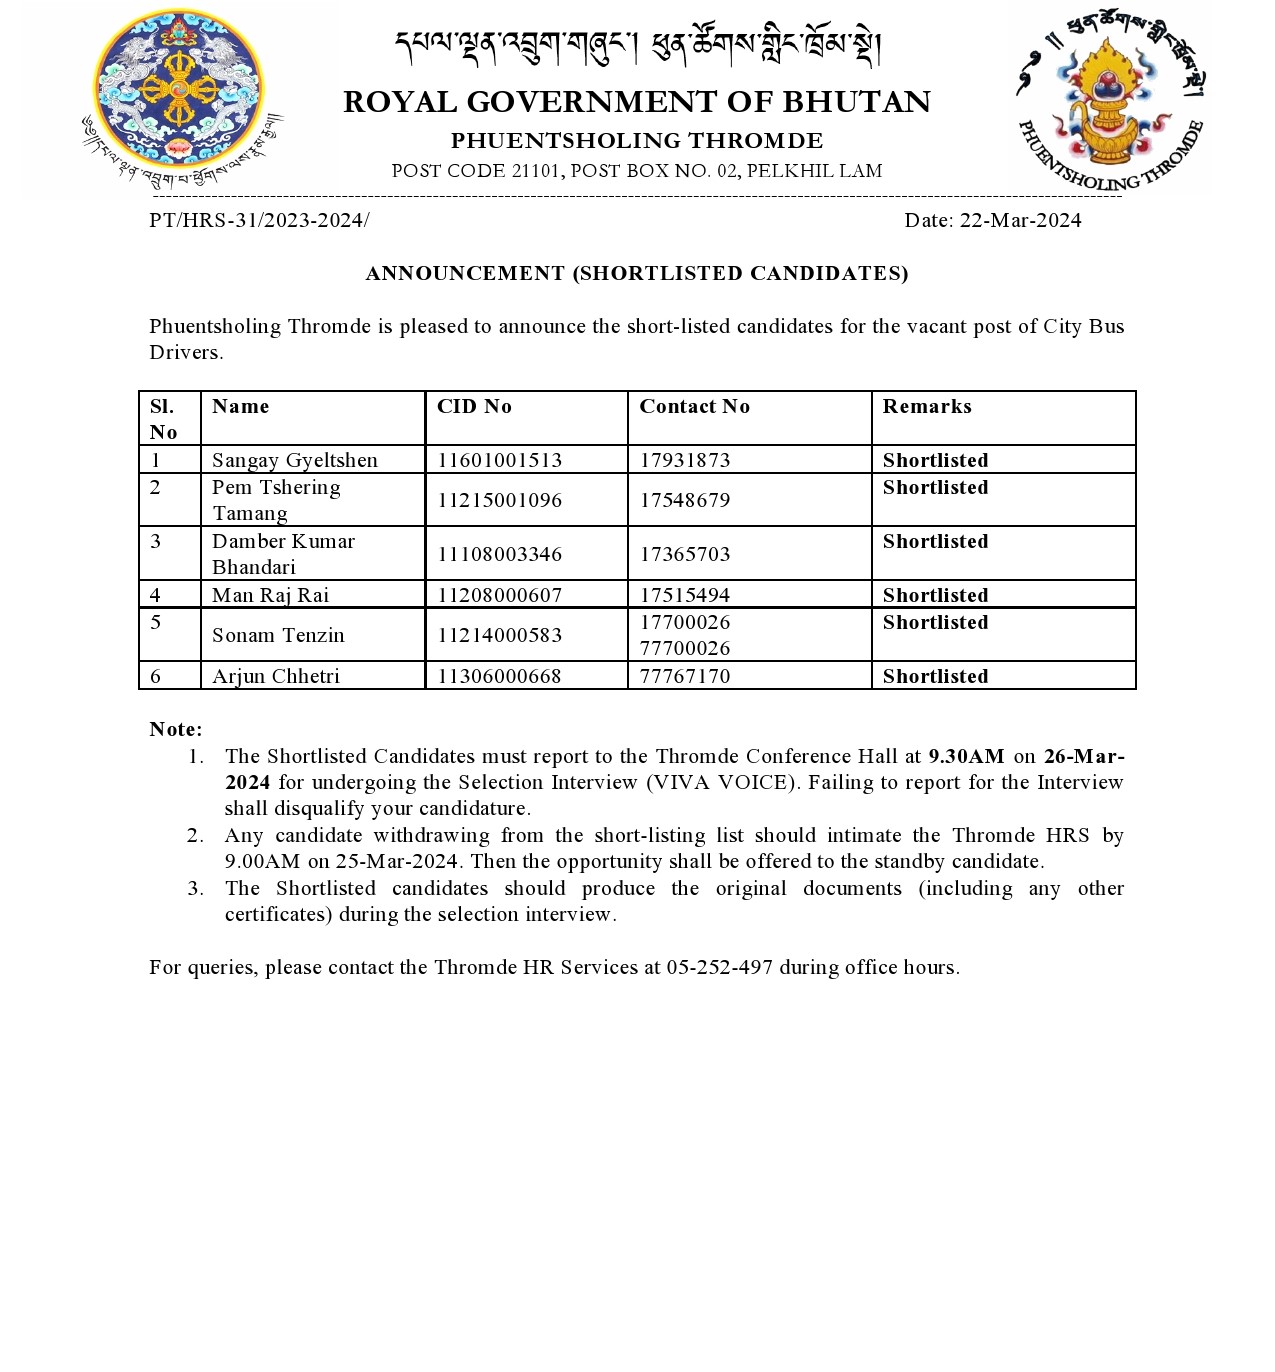 Announcement for the shortlisted candidates